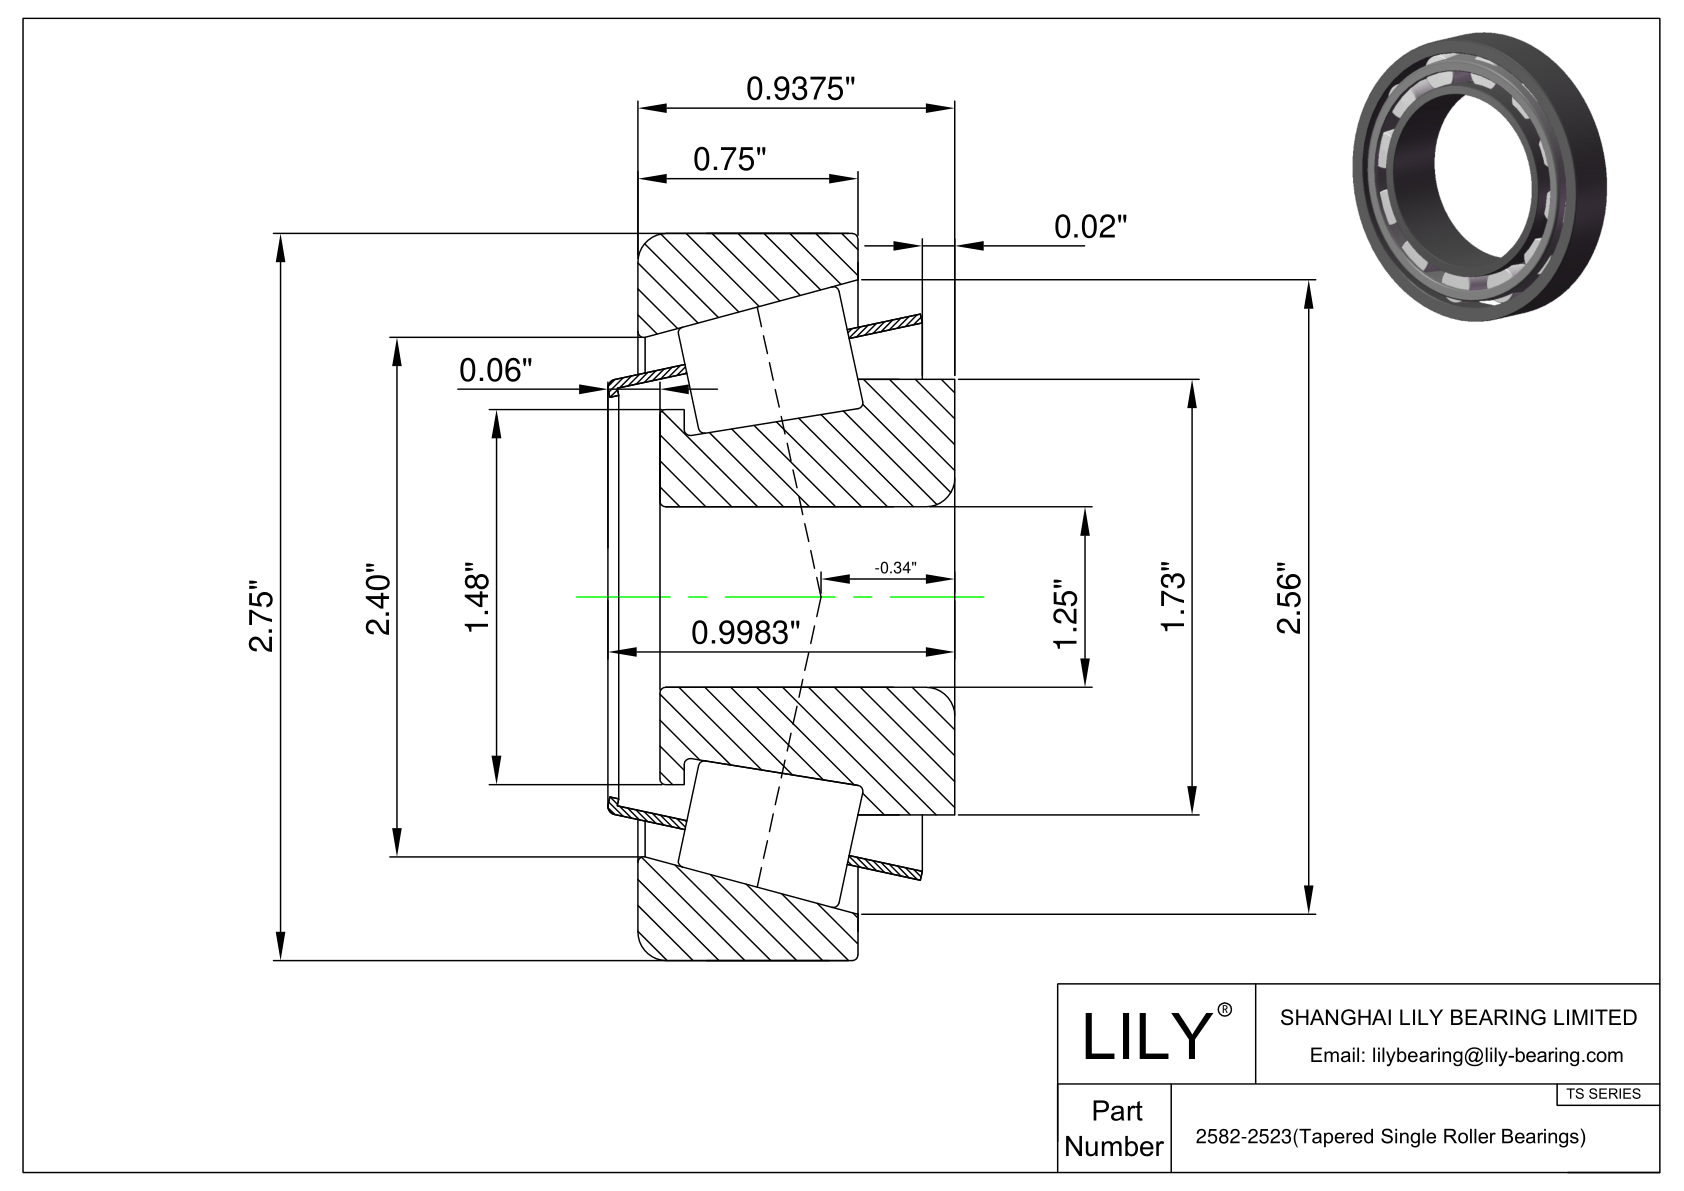 2582-2523 TS (Tapered Single Roller Bearings) (Imperial) cad drawing